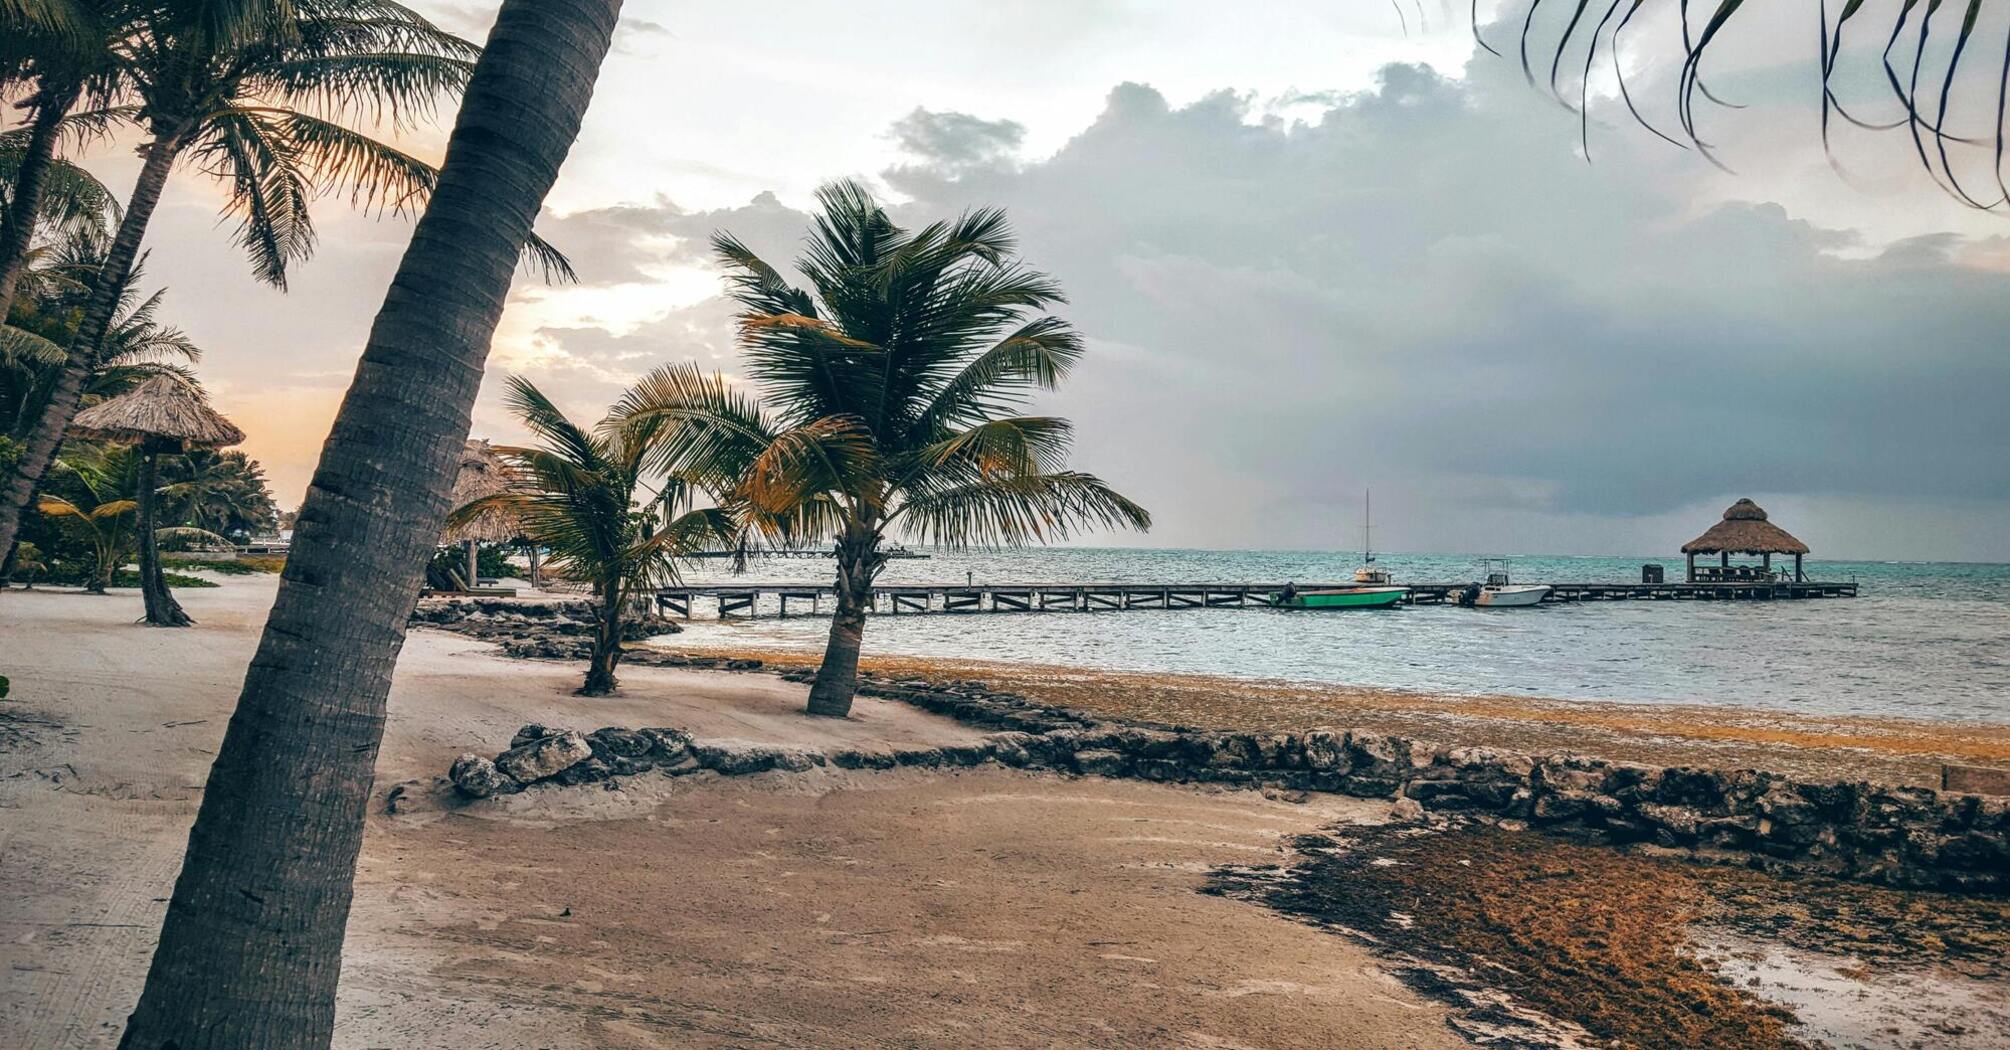 A serene view of the beach in San Pedro, Corozal District, Belize, with palm trees, a dock, and boats under a cloudy sky at dusk